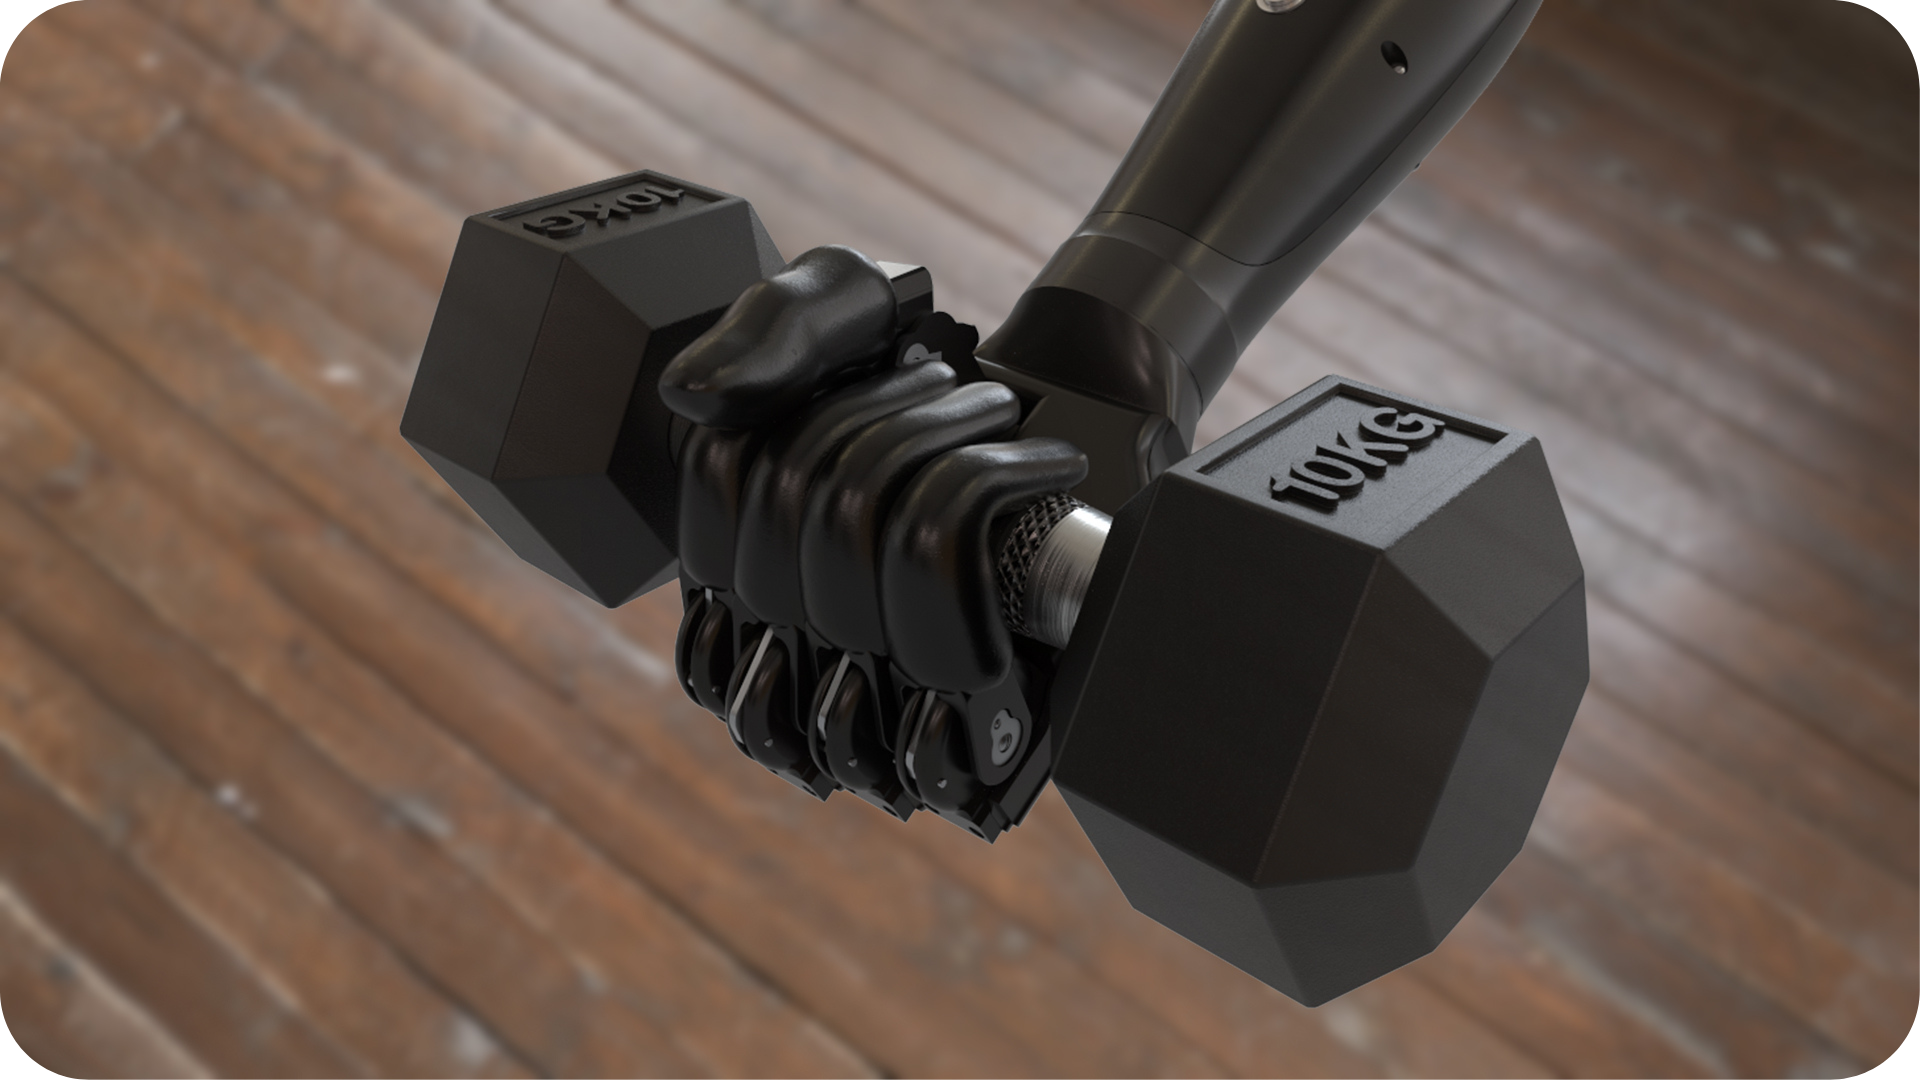 A Bionic hand holding a 10kg Dumbell